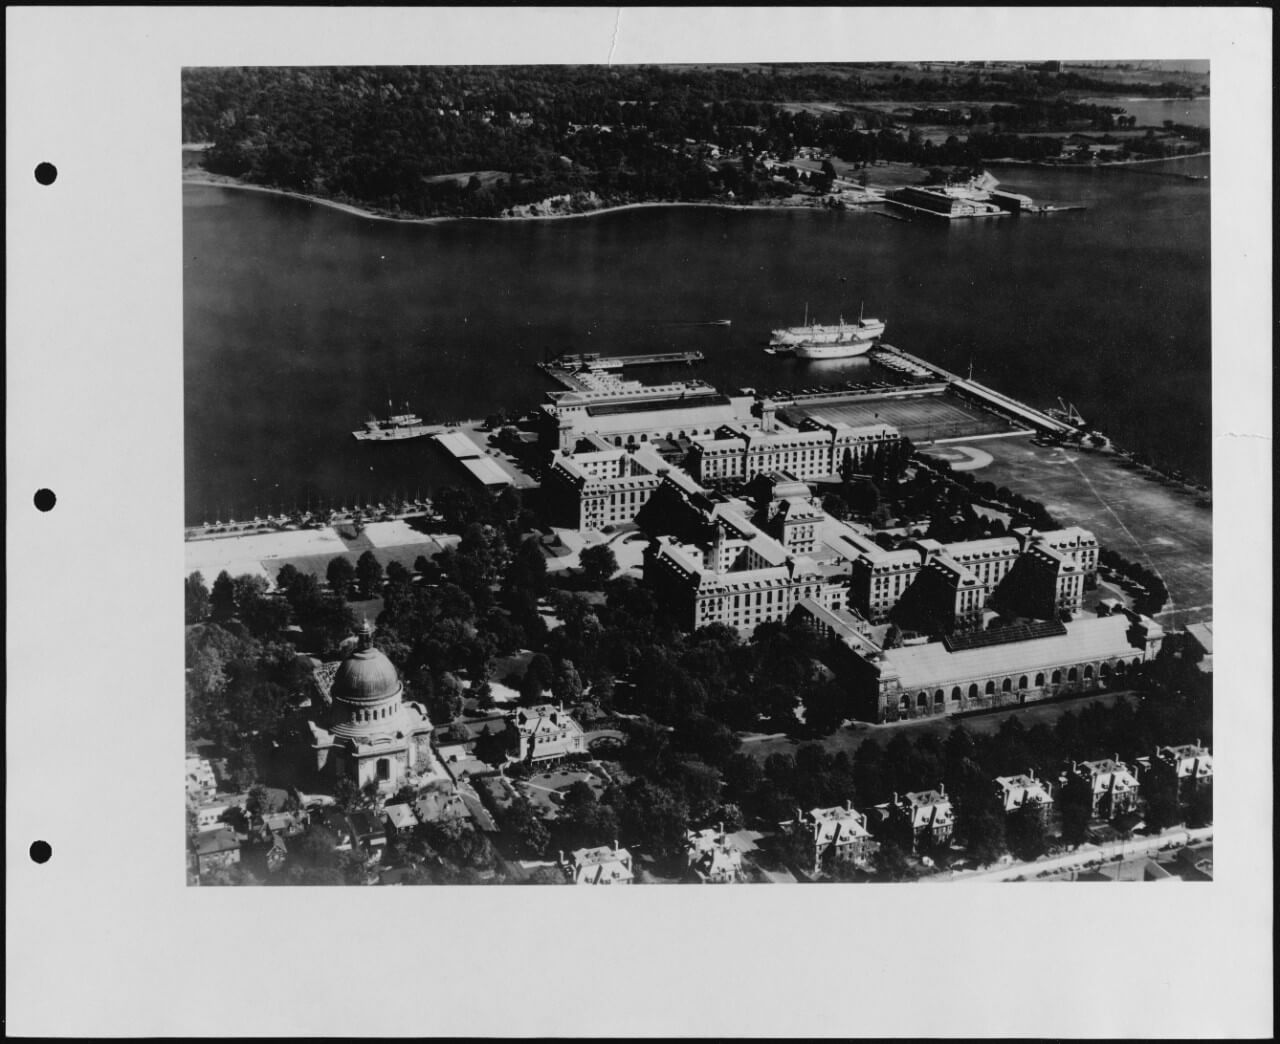 an early photo of the Naval School